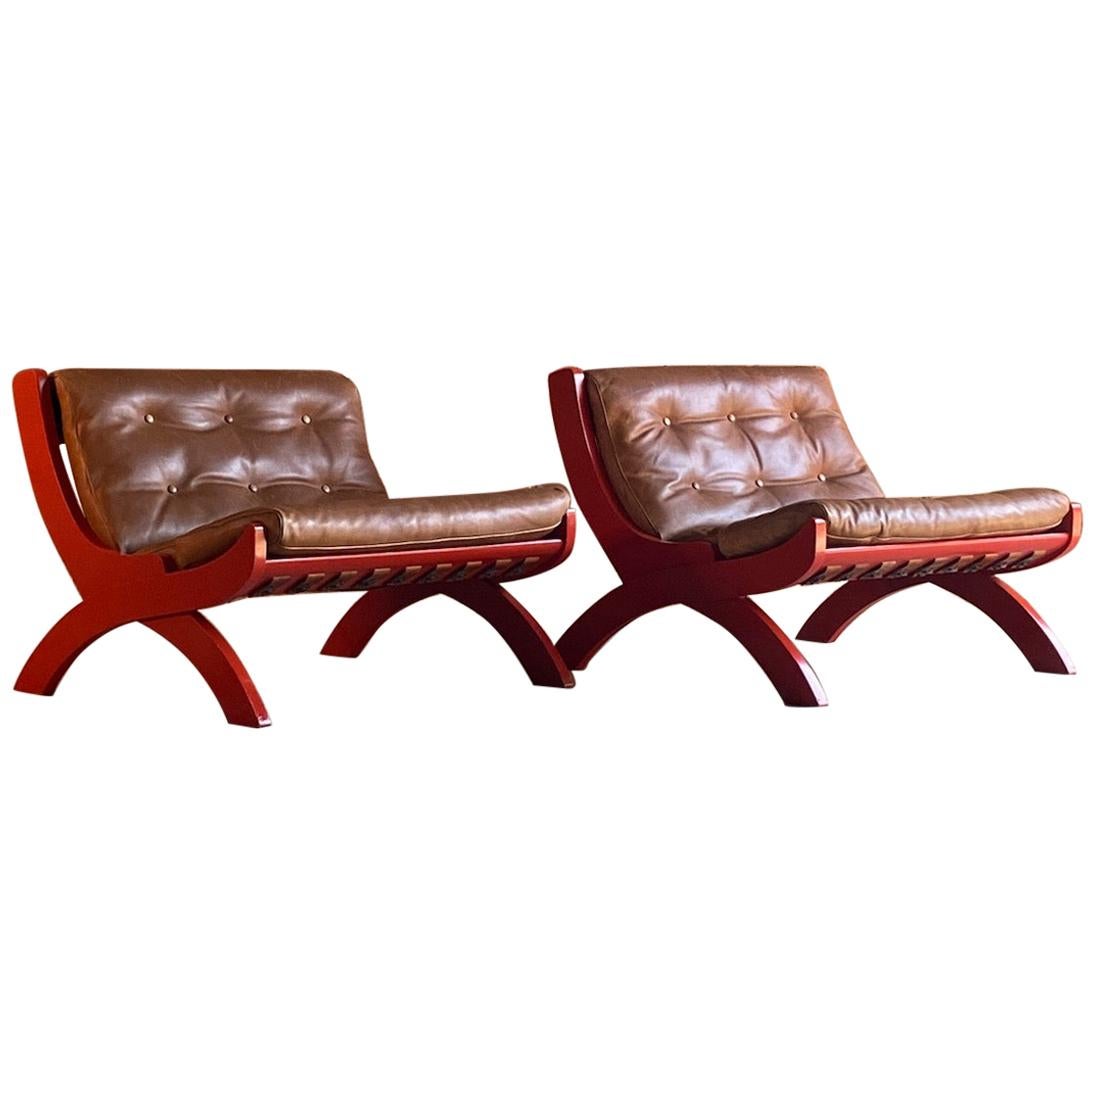 Marco Comolli CP1 lounge chairs by ICF, Italy, circa 1963

Fabulous pair of Marco Comolli Model CP1 Coppia di Poltrone lounge chairs by ICF De Padova Italy circa 1963, finished in tangerine colored walnut frames with brown tufted camel leather